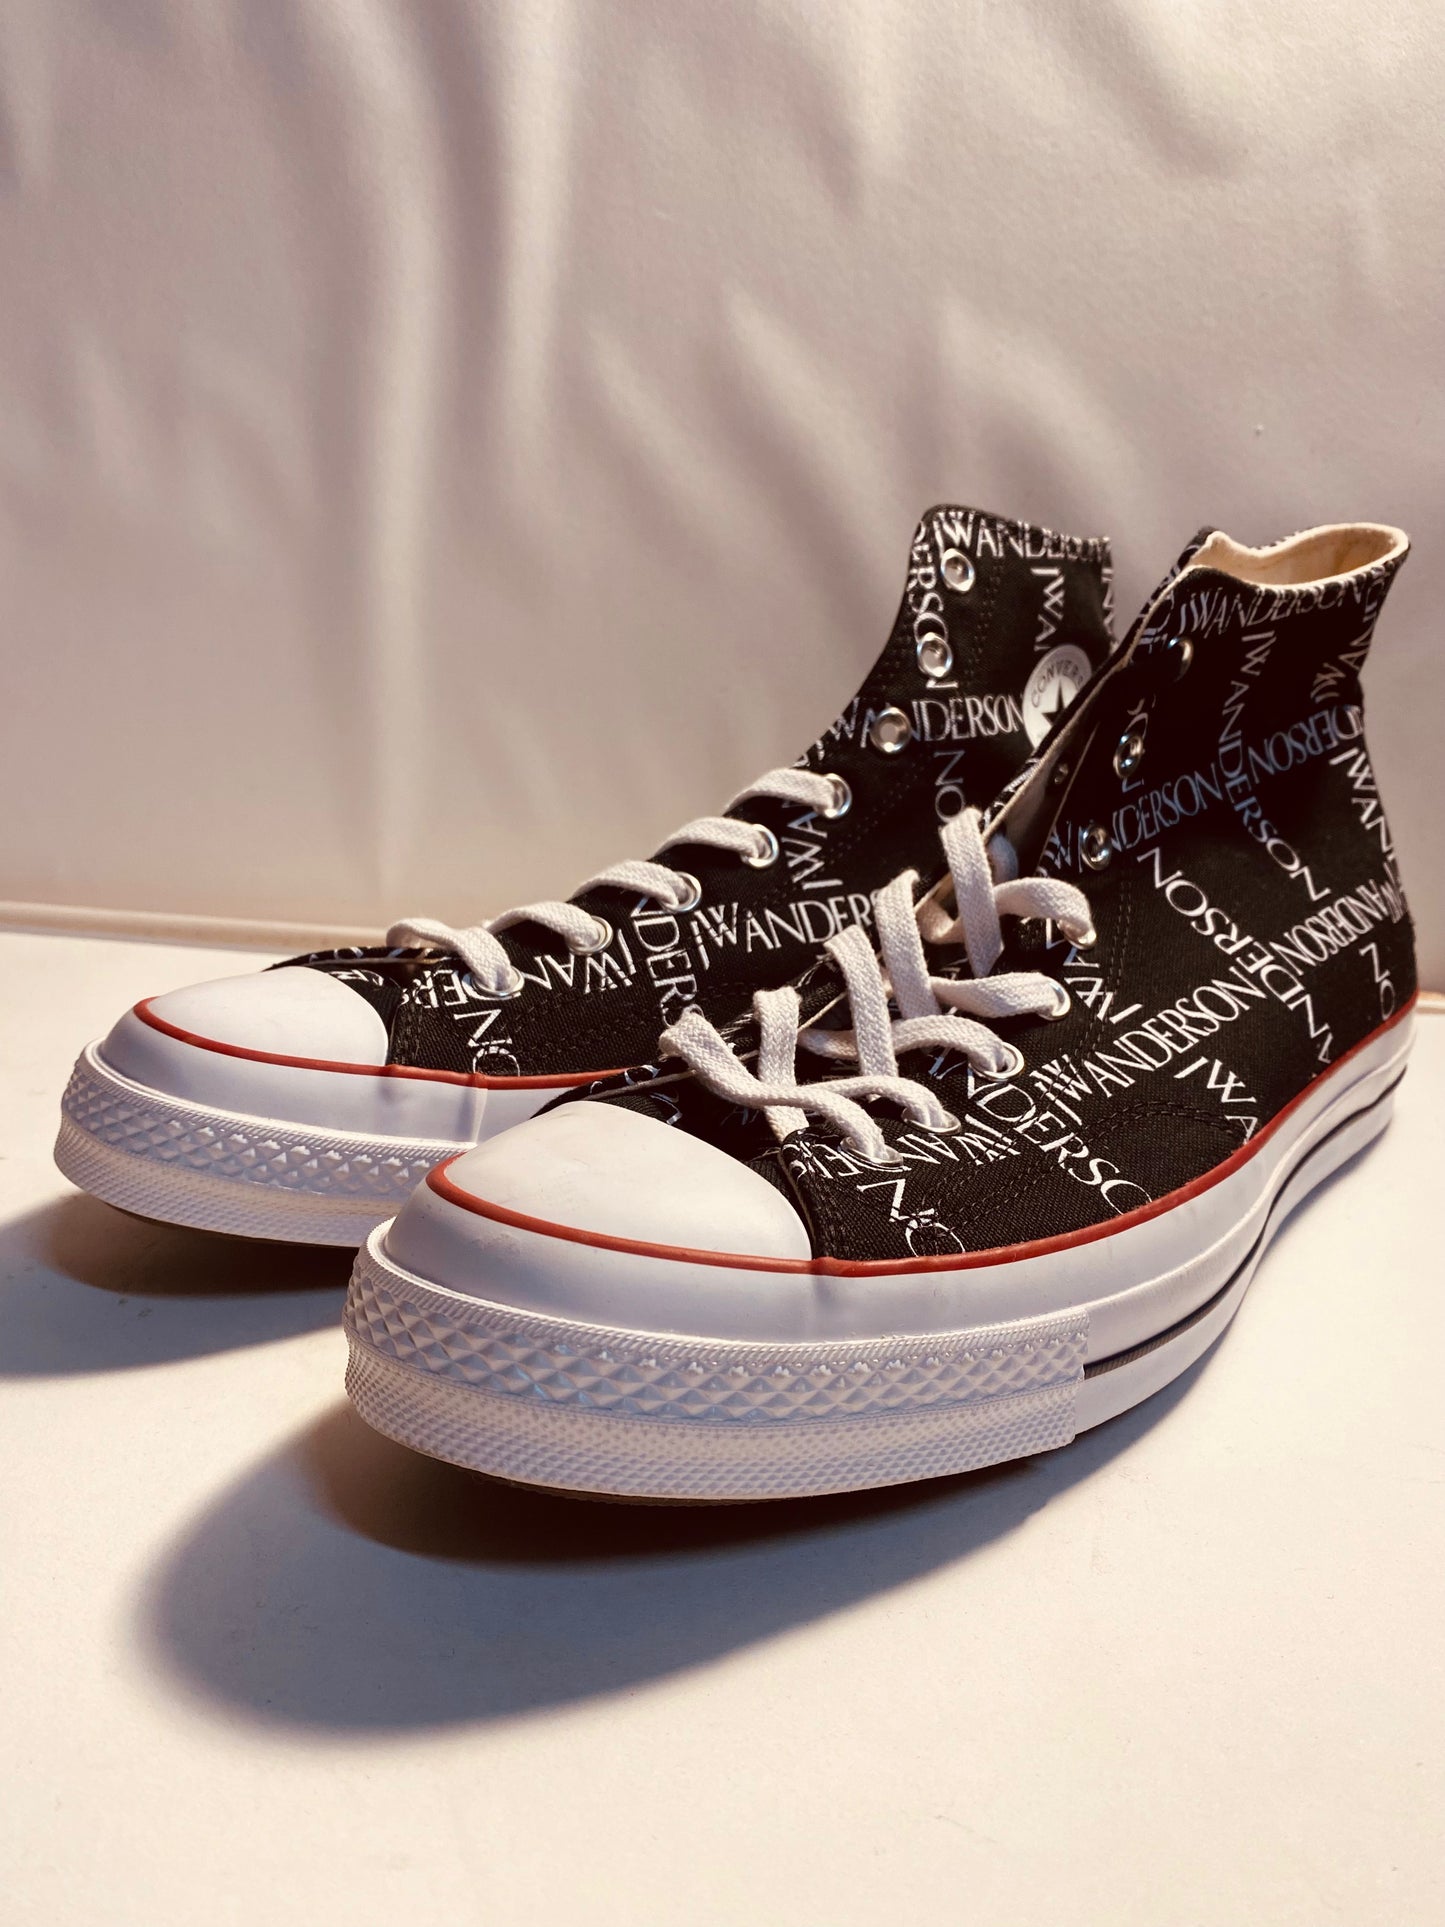 JW Anderson High Top Chuck Taylors, Size 13